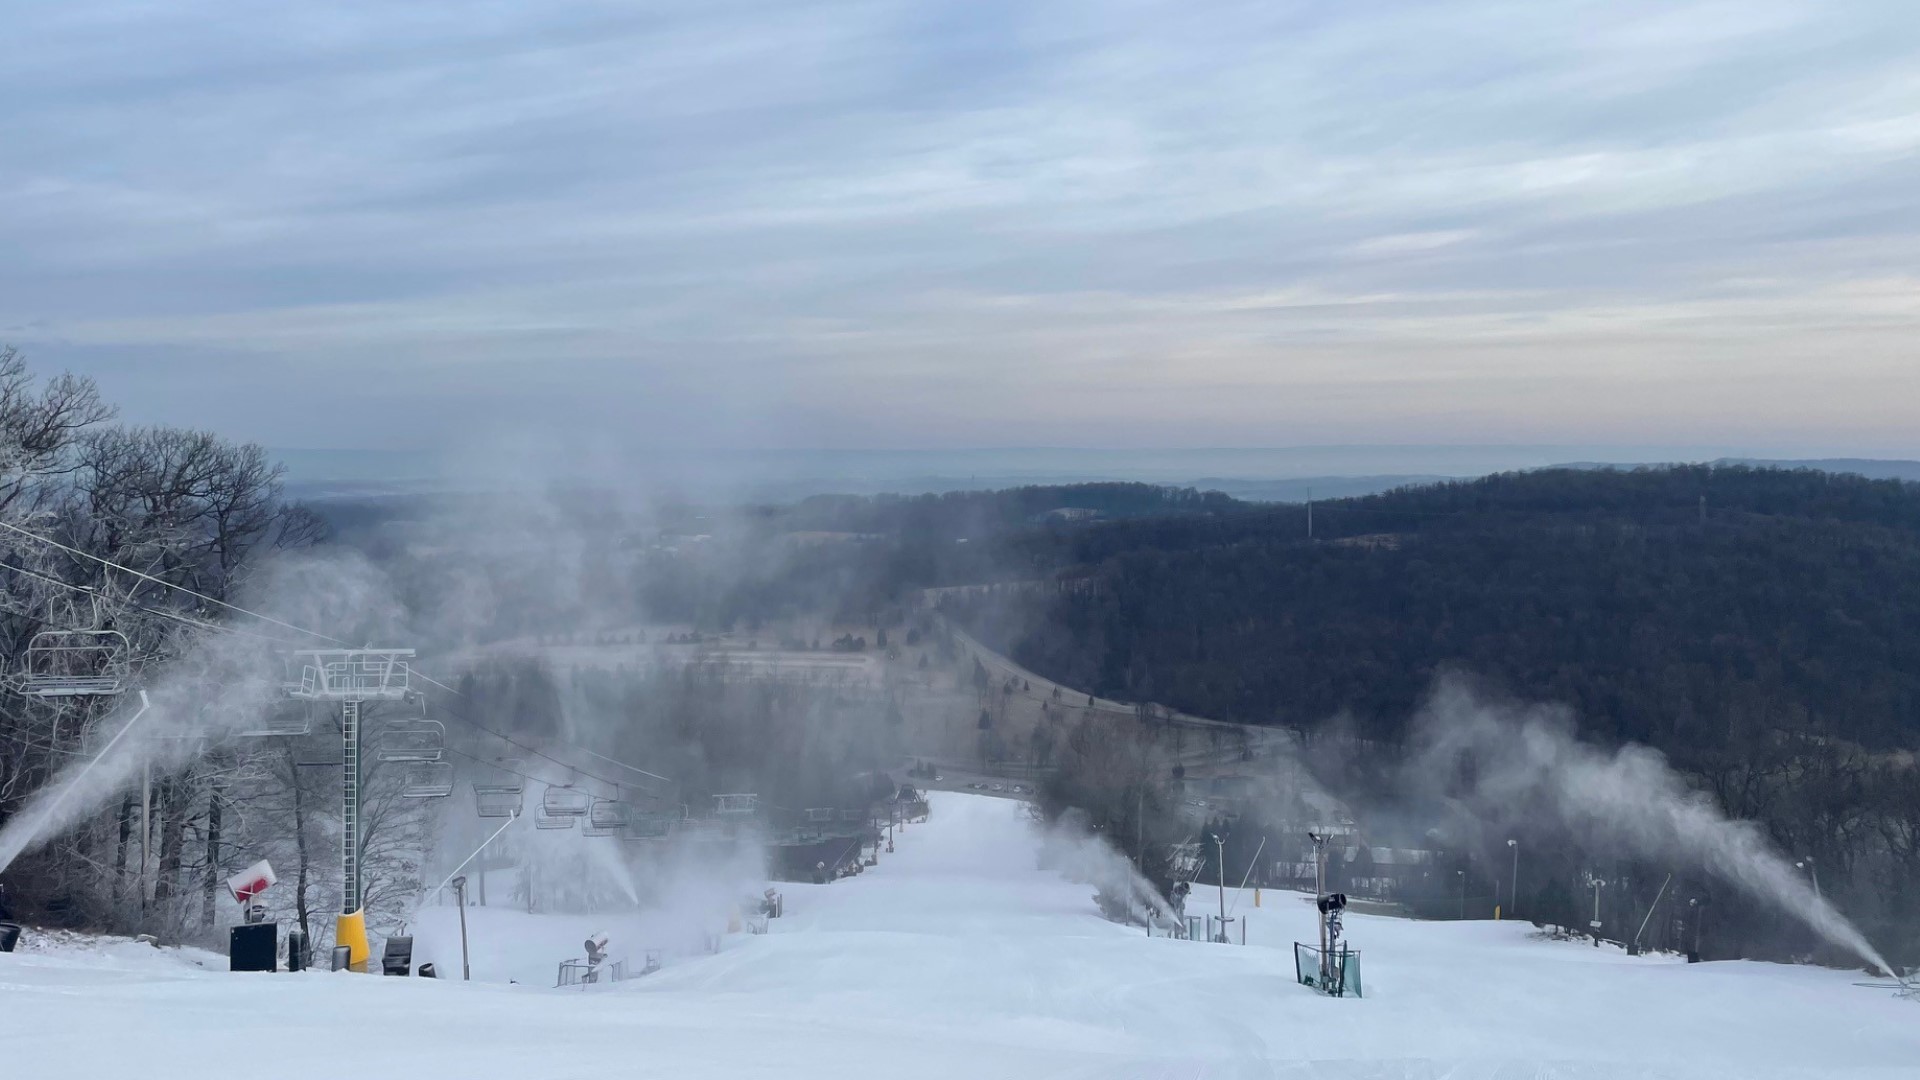 Roundtop Mountain Resort is increasing their snowmaking infrastructure to keep snow on the slopes.